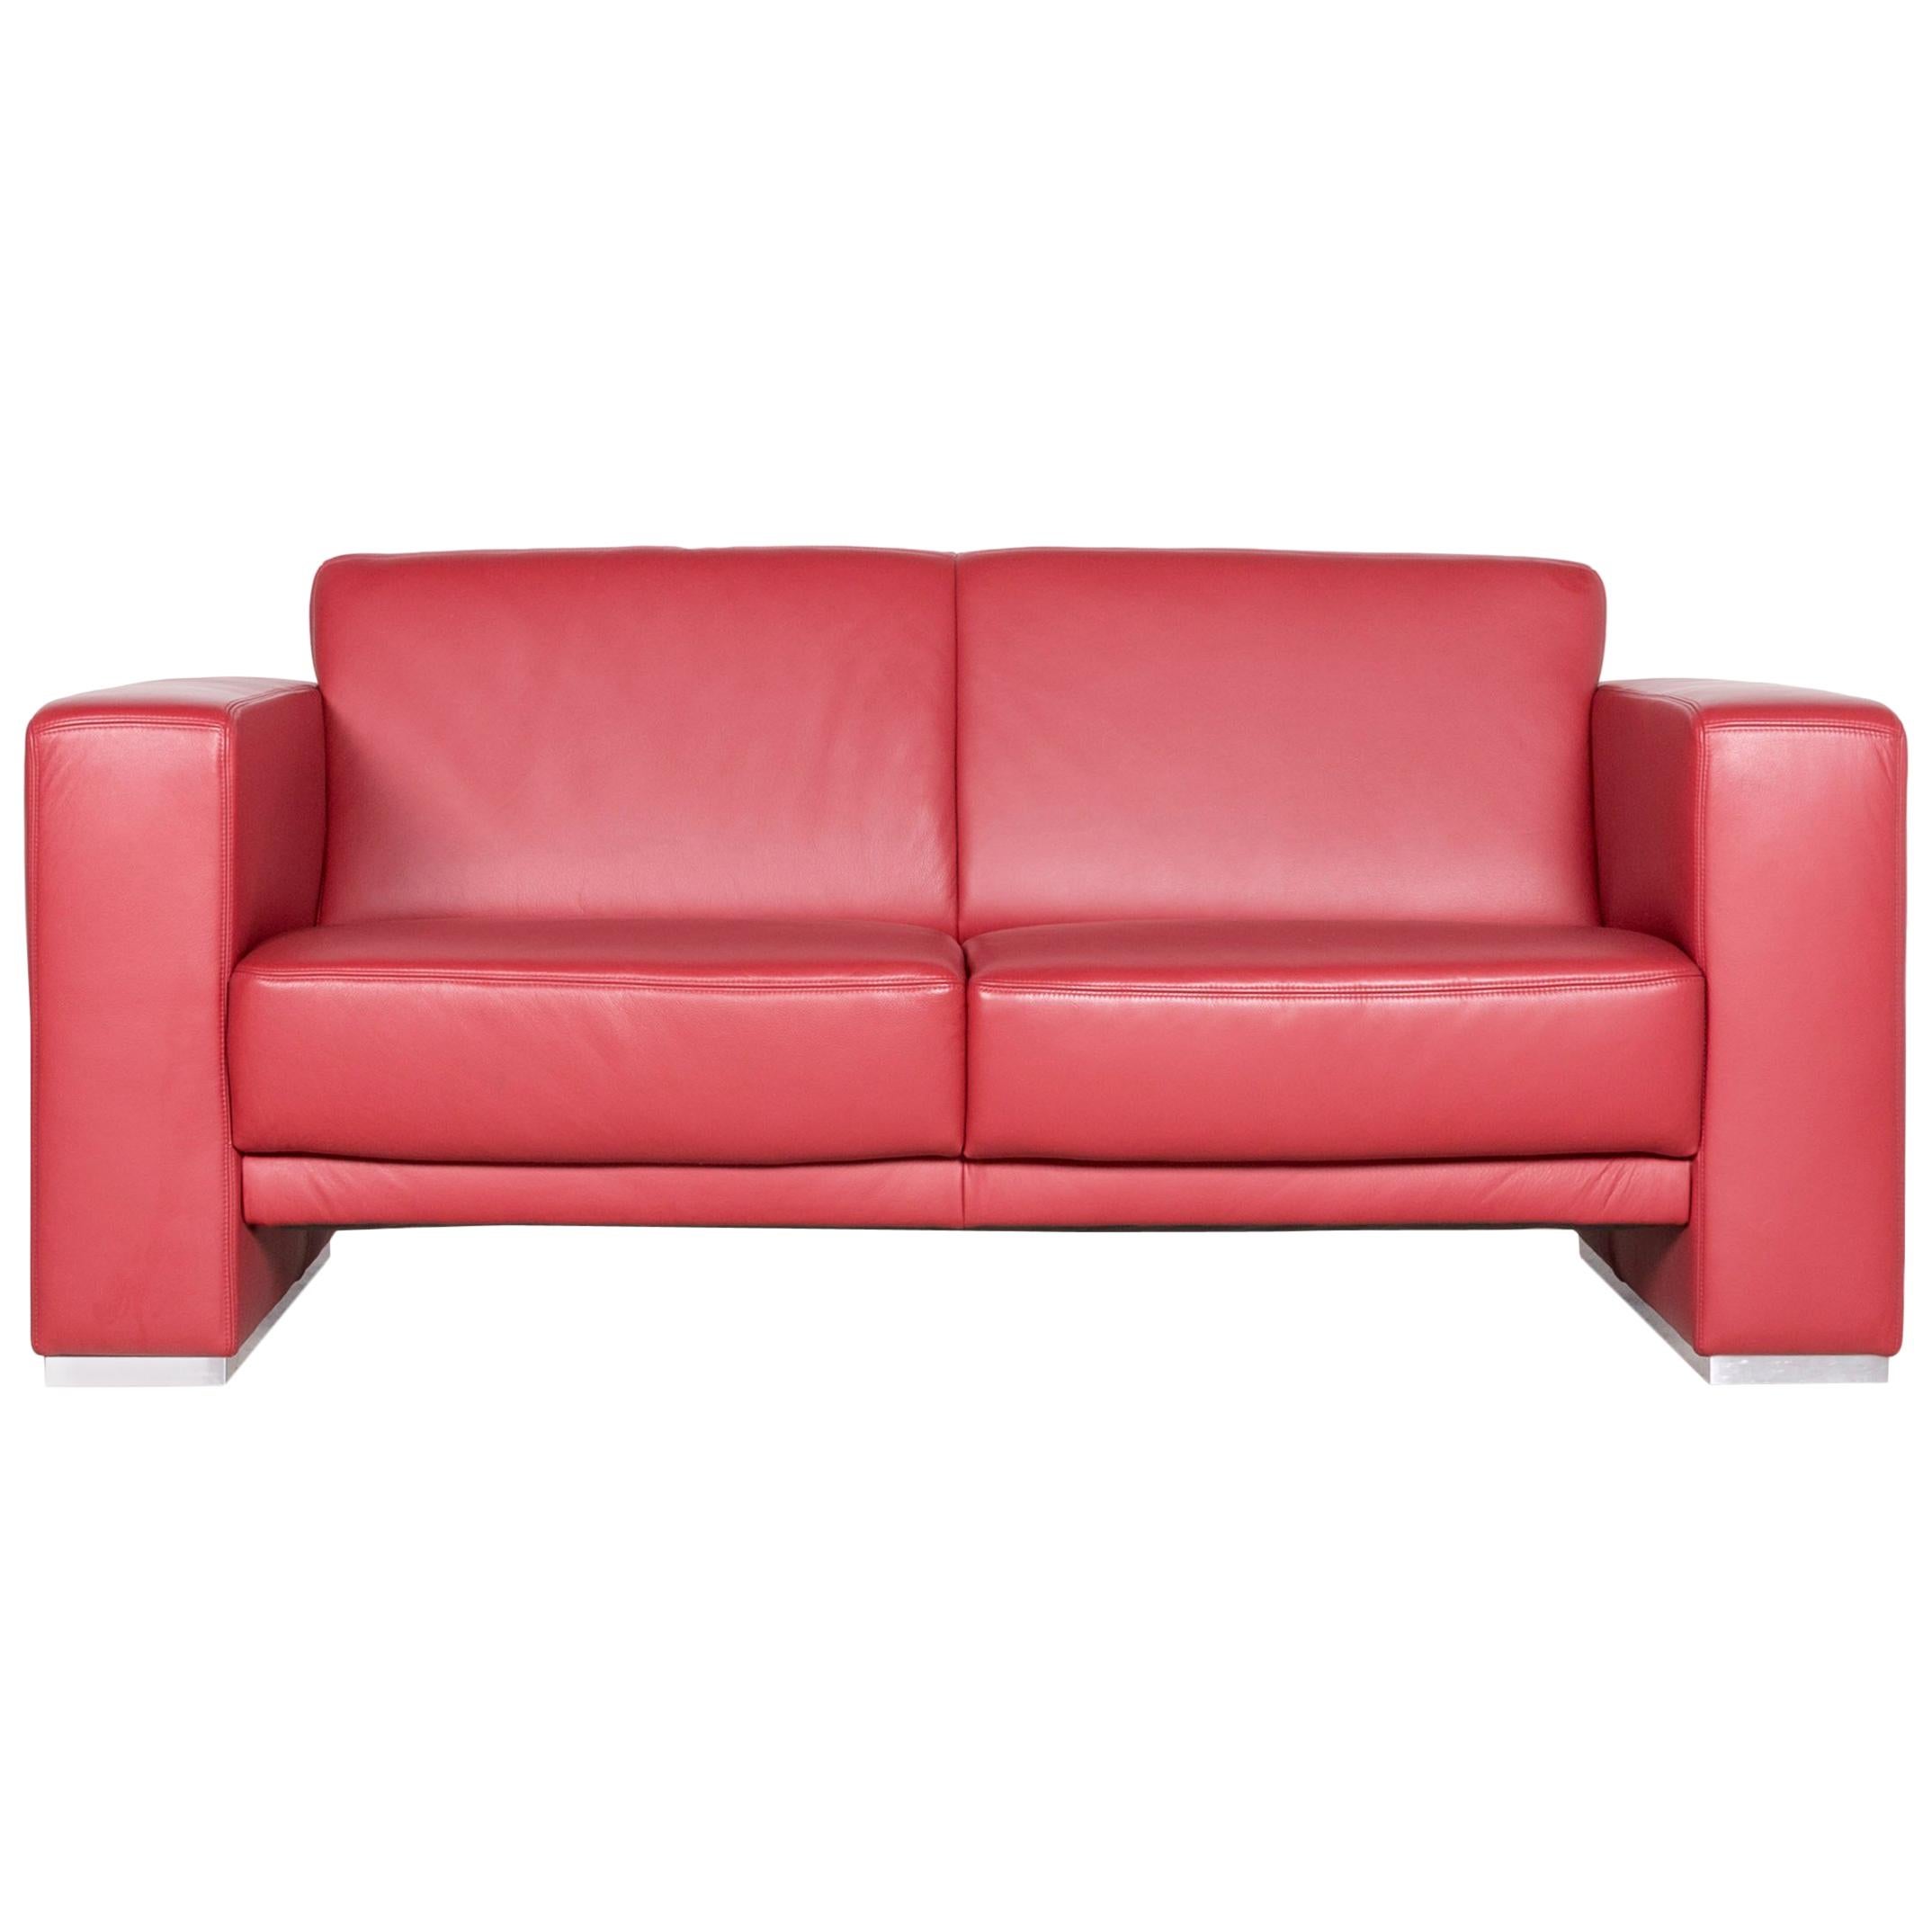 Koinor Nove Designer Leather Sofa Red Two-Seat Couch For Sale